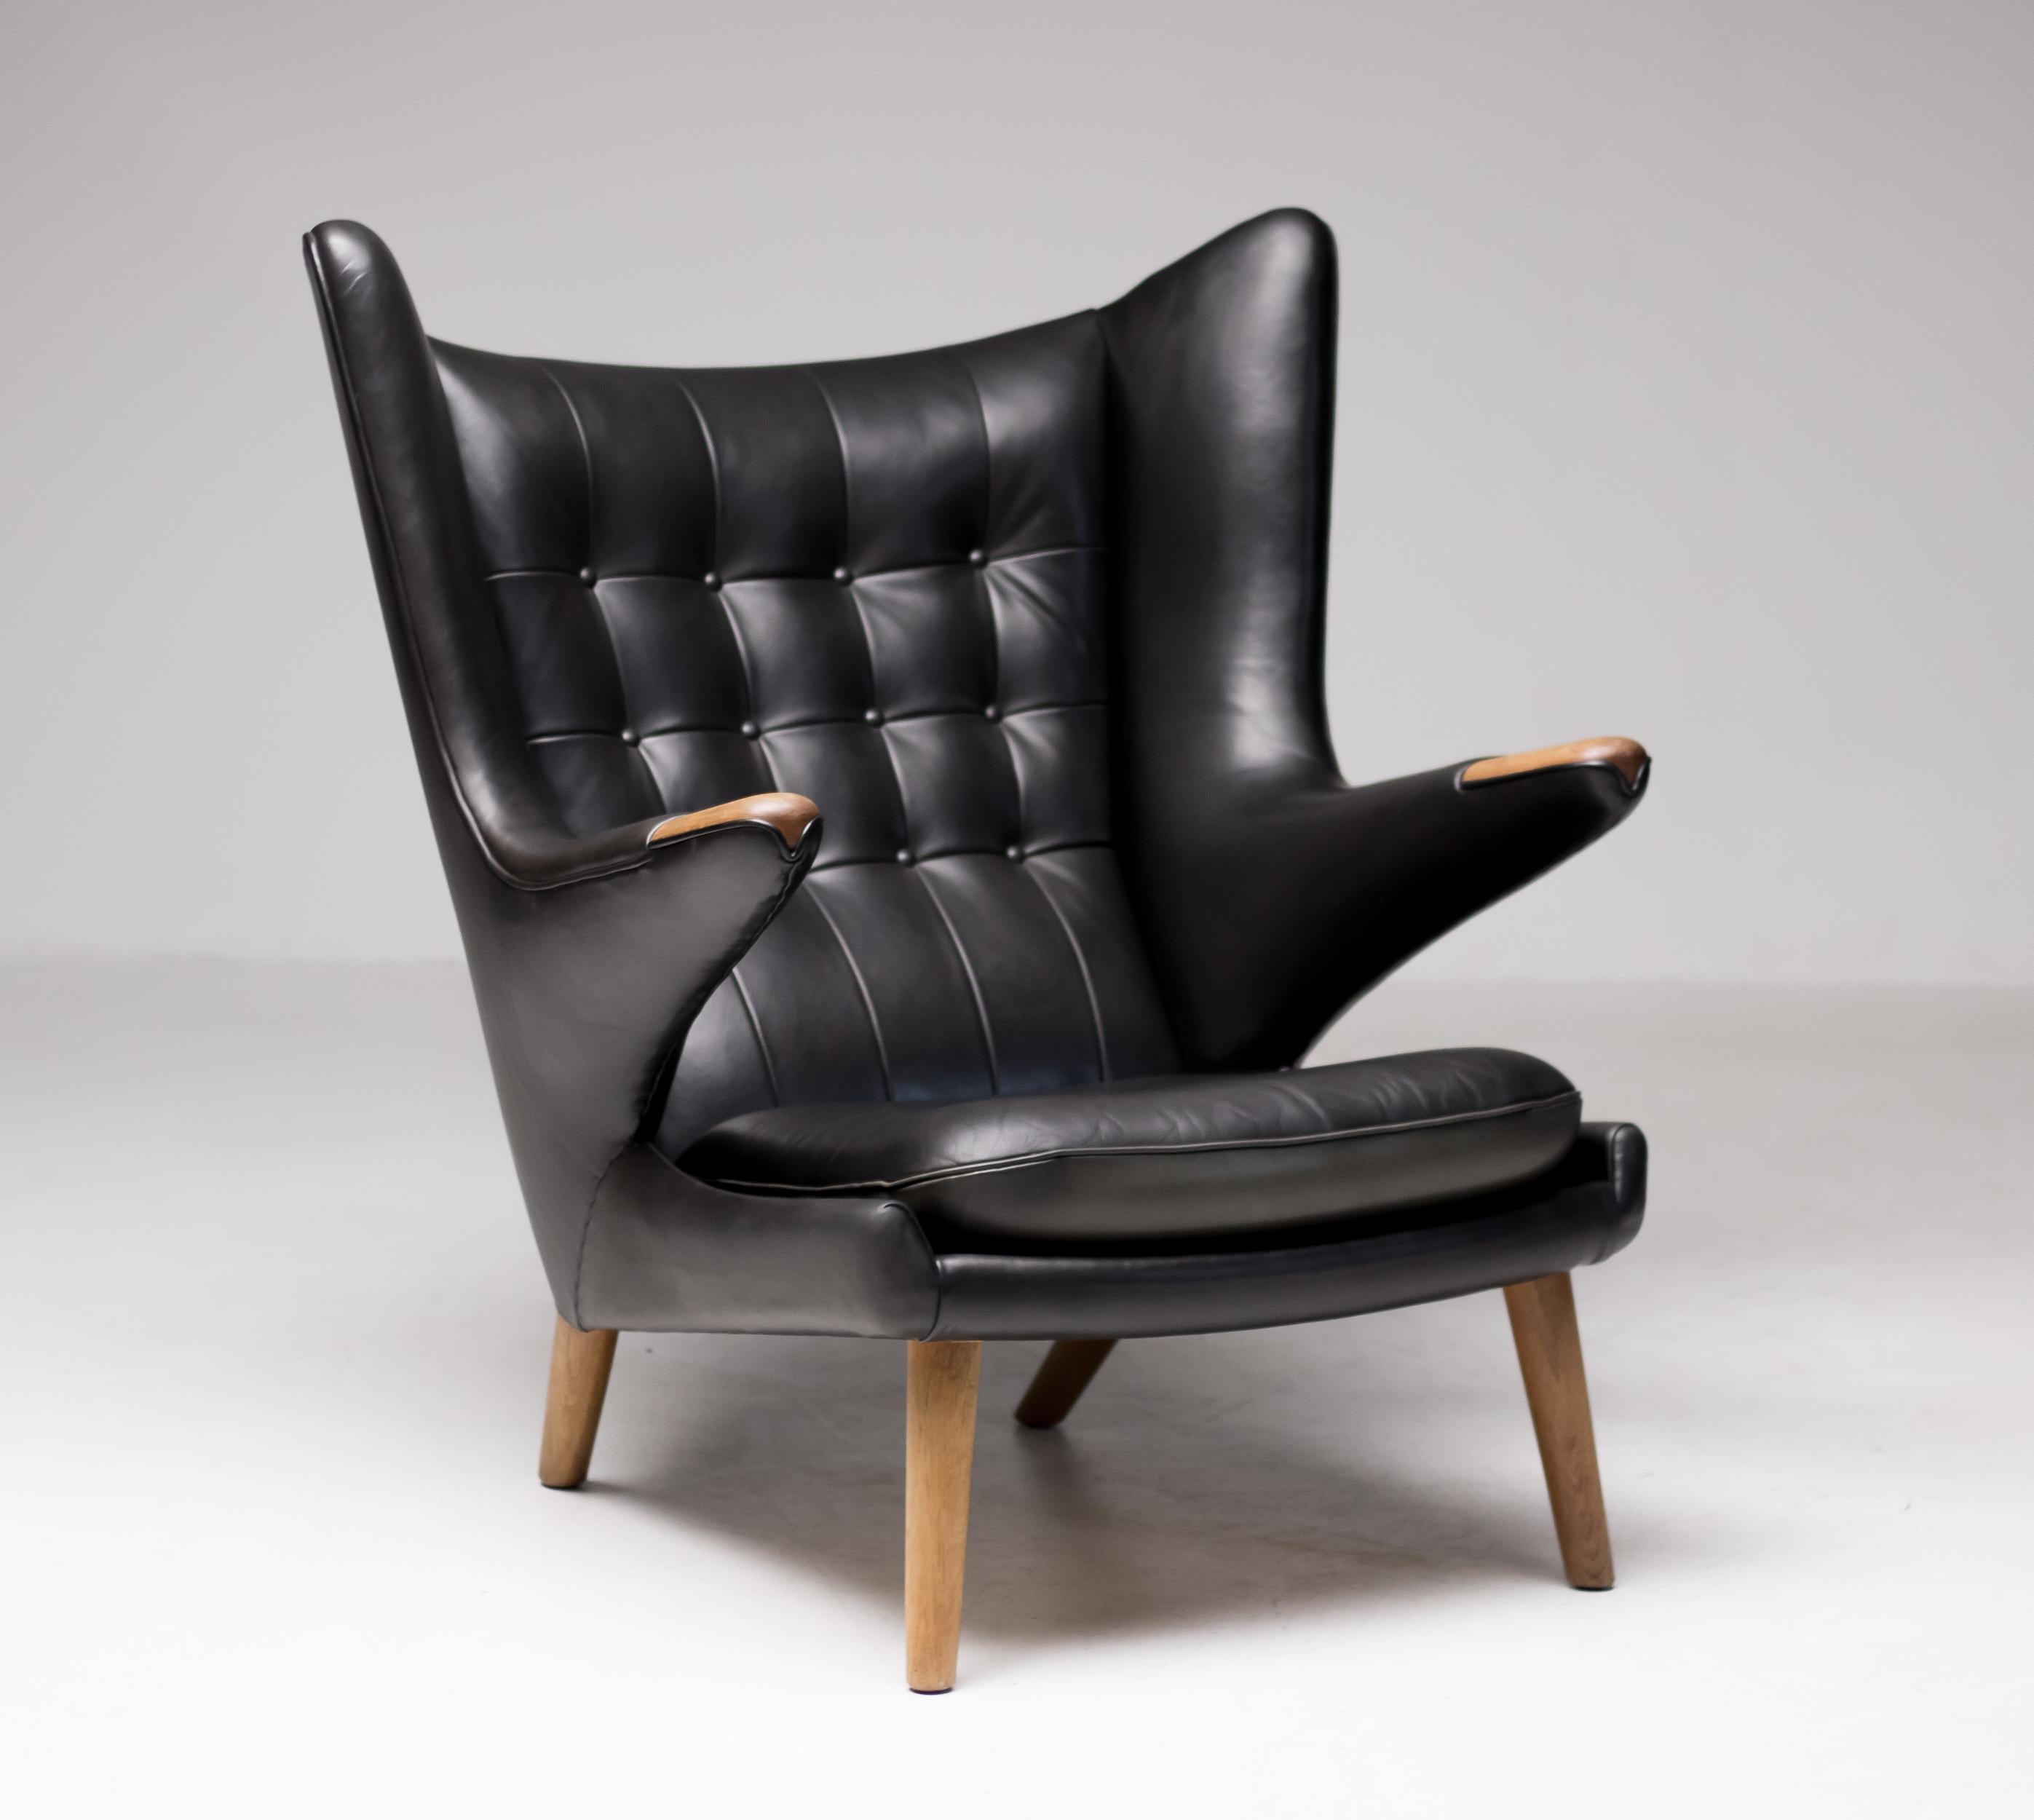 Hans J. Wegner black leather pair of Papa Bear chairs with one ottoman for A.P. Stolen, circa 1950.
Great pampered condition, the natural dye black leather is still very soft and supple.
Priced as a set.

Provenance: 
Klassik Copenhagen
Danish